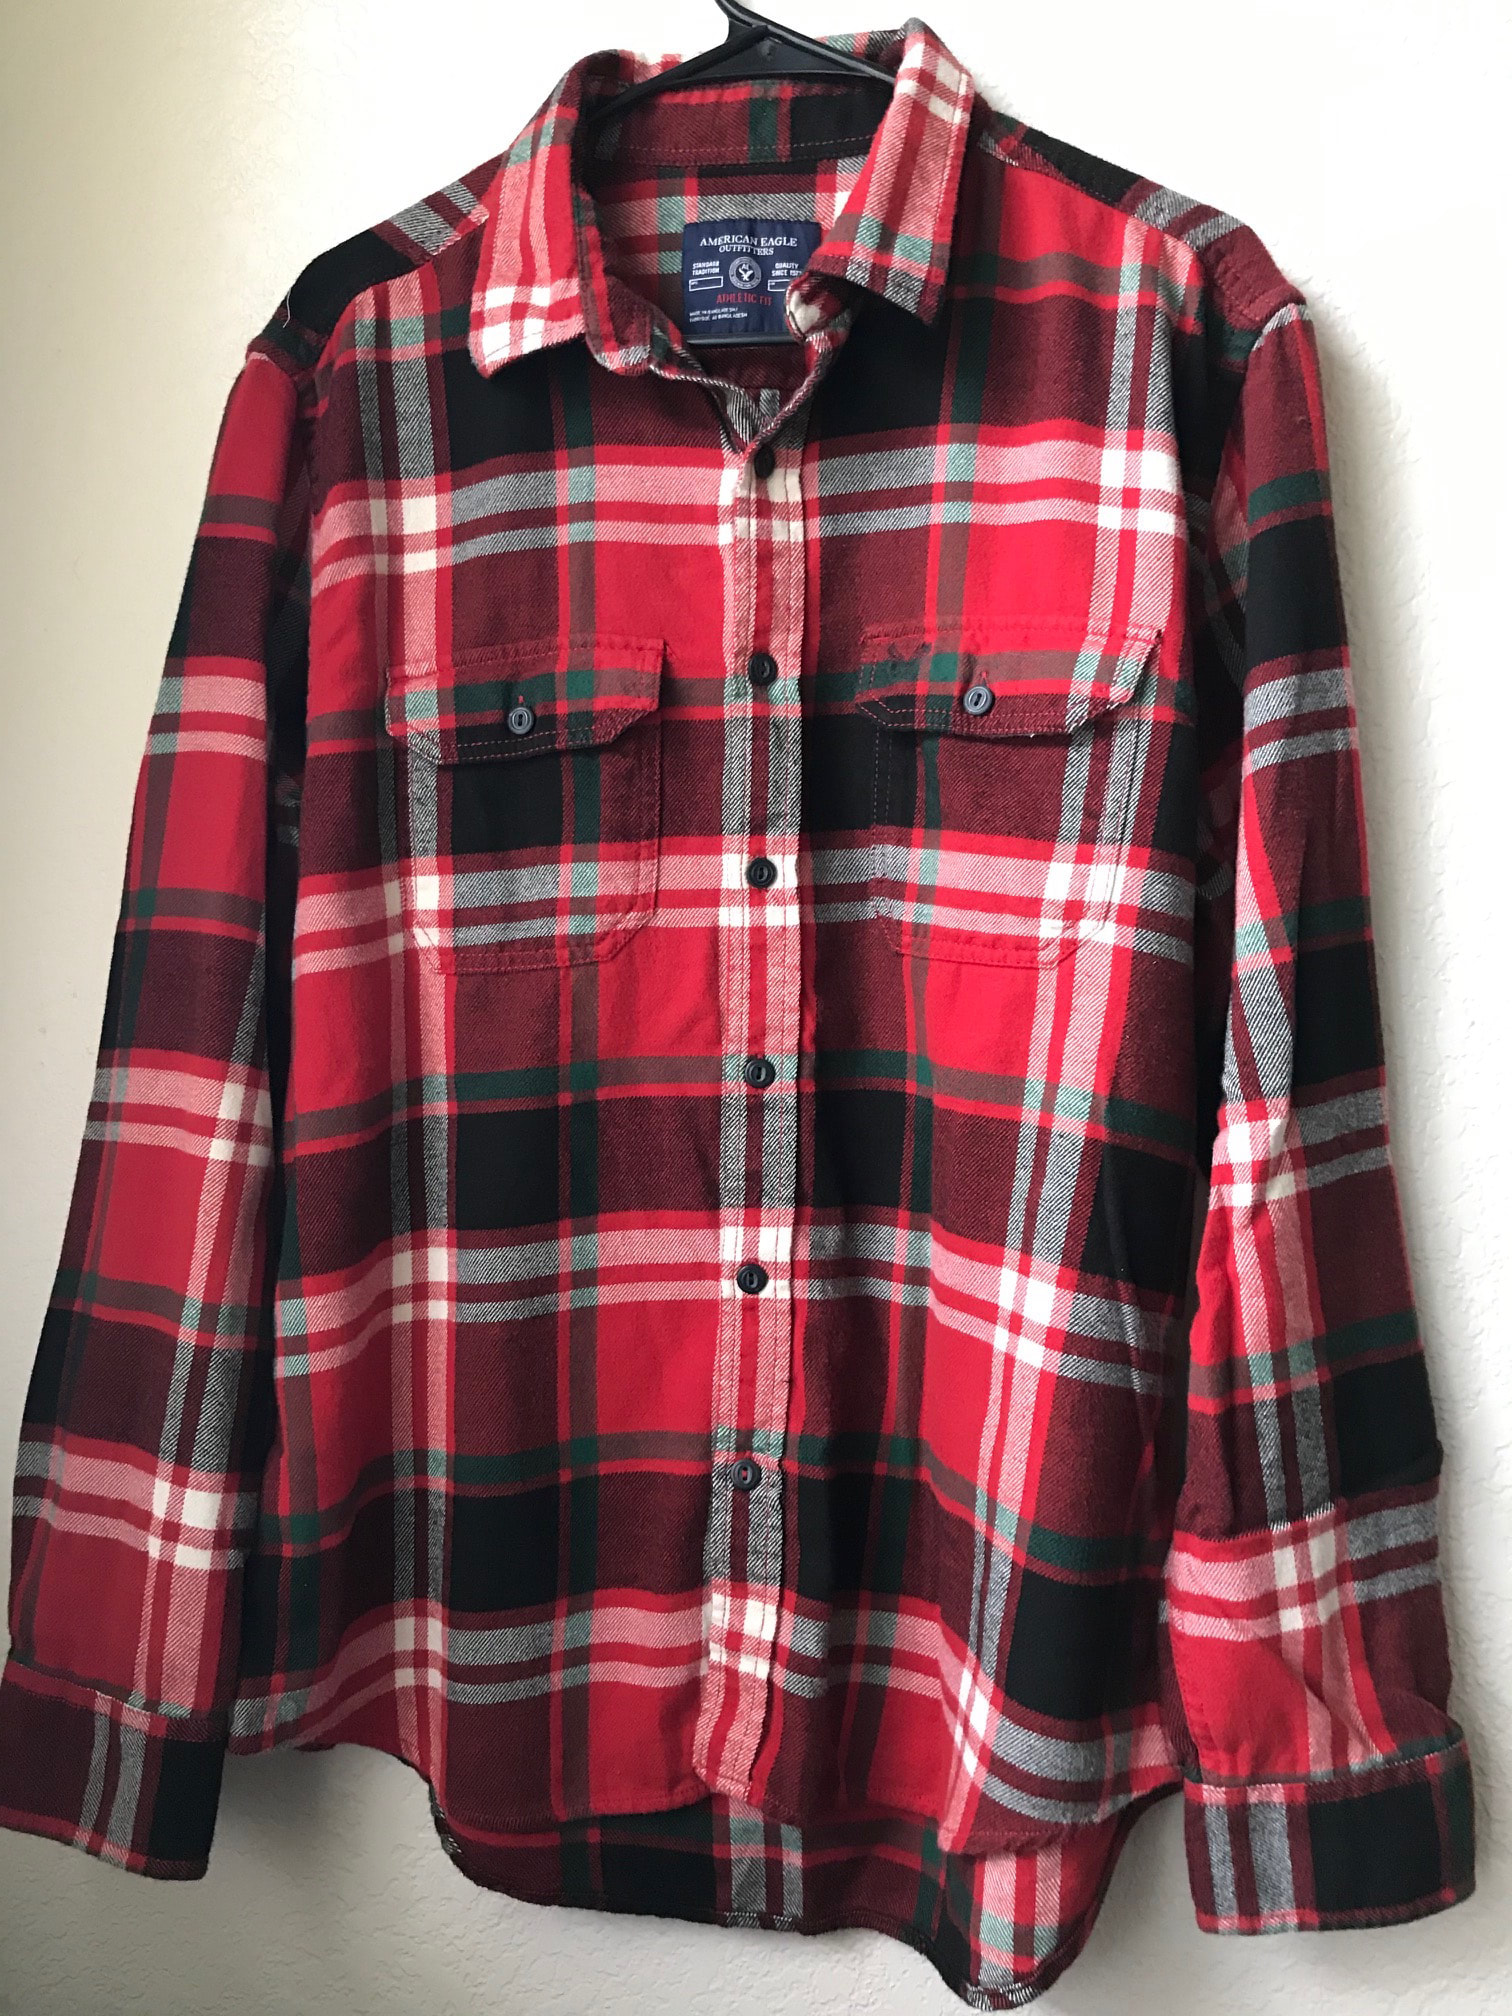 I thought i was alone, hand painted flannel